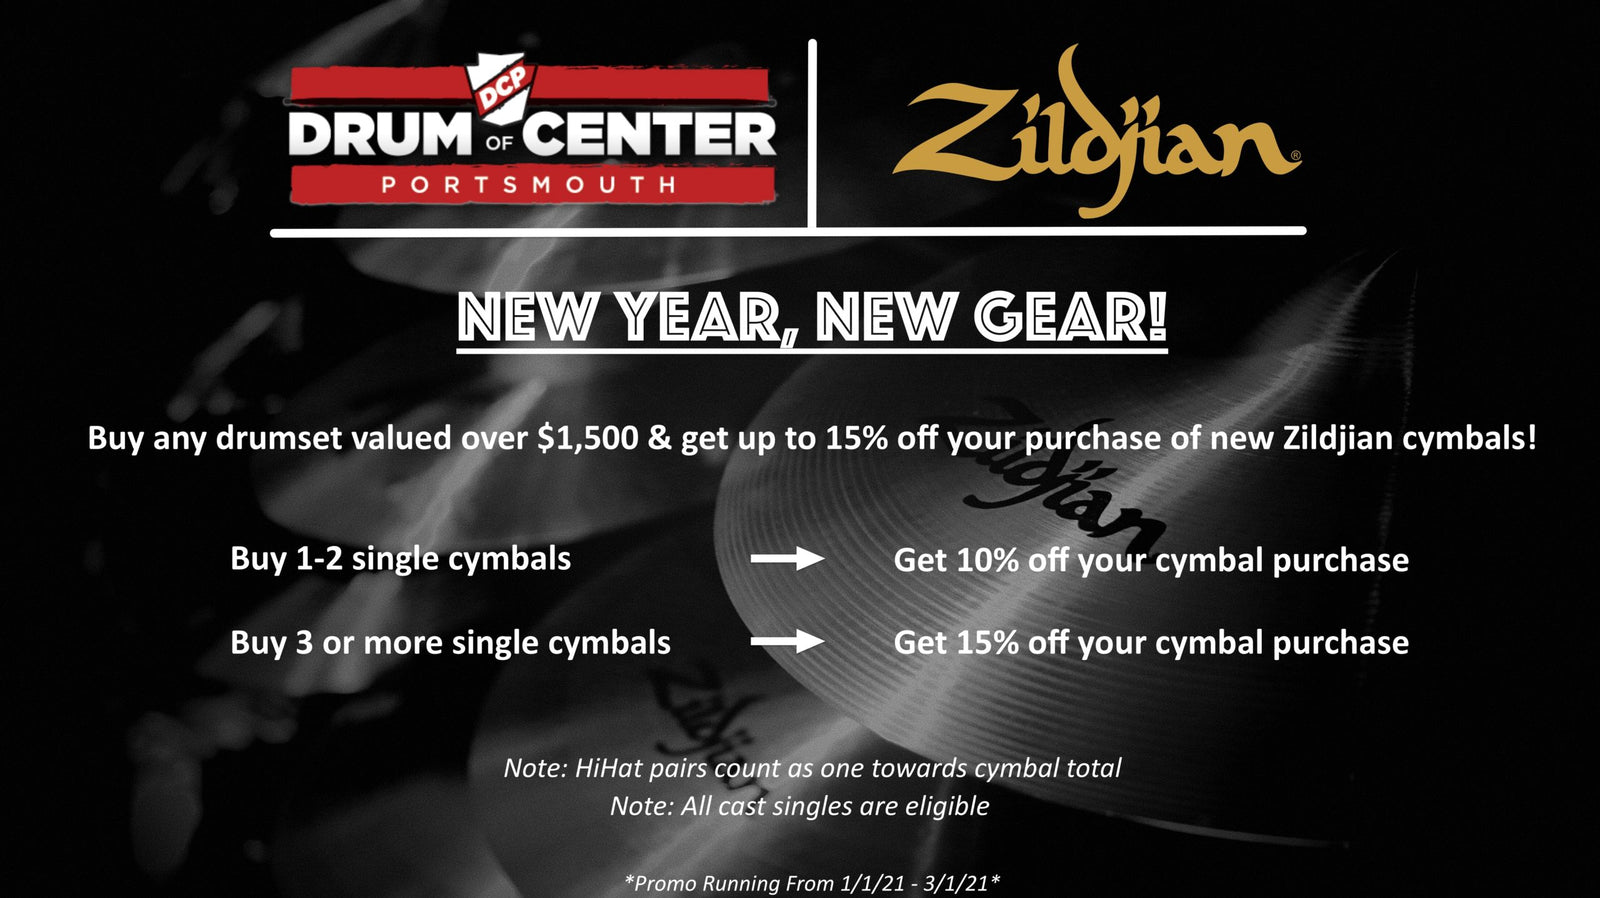 Buy Any Drum Set $1500 or over and Get up to 15% off on Zildjian Cymbals!